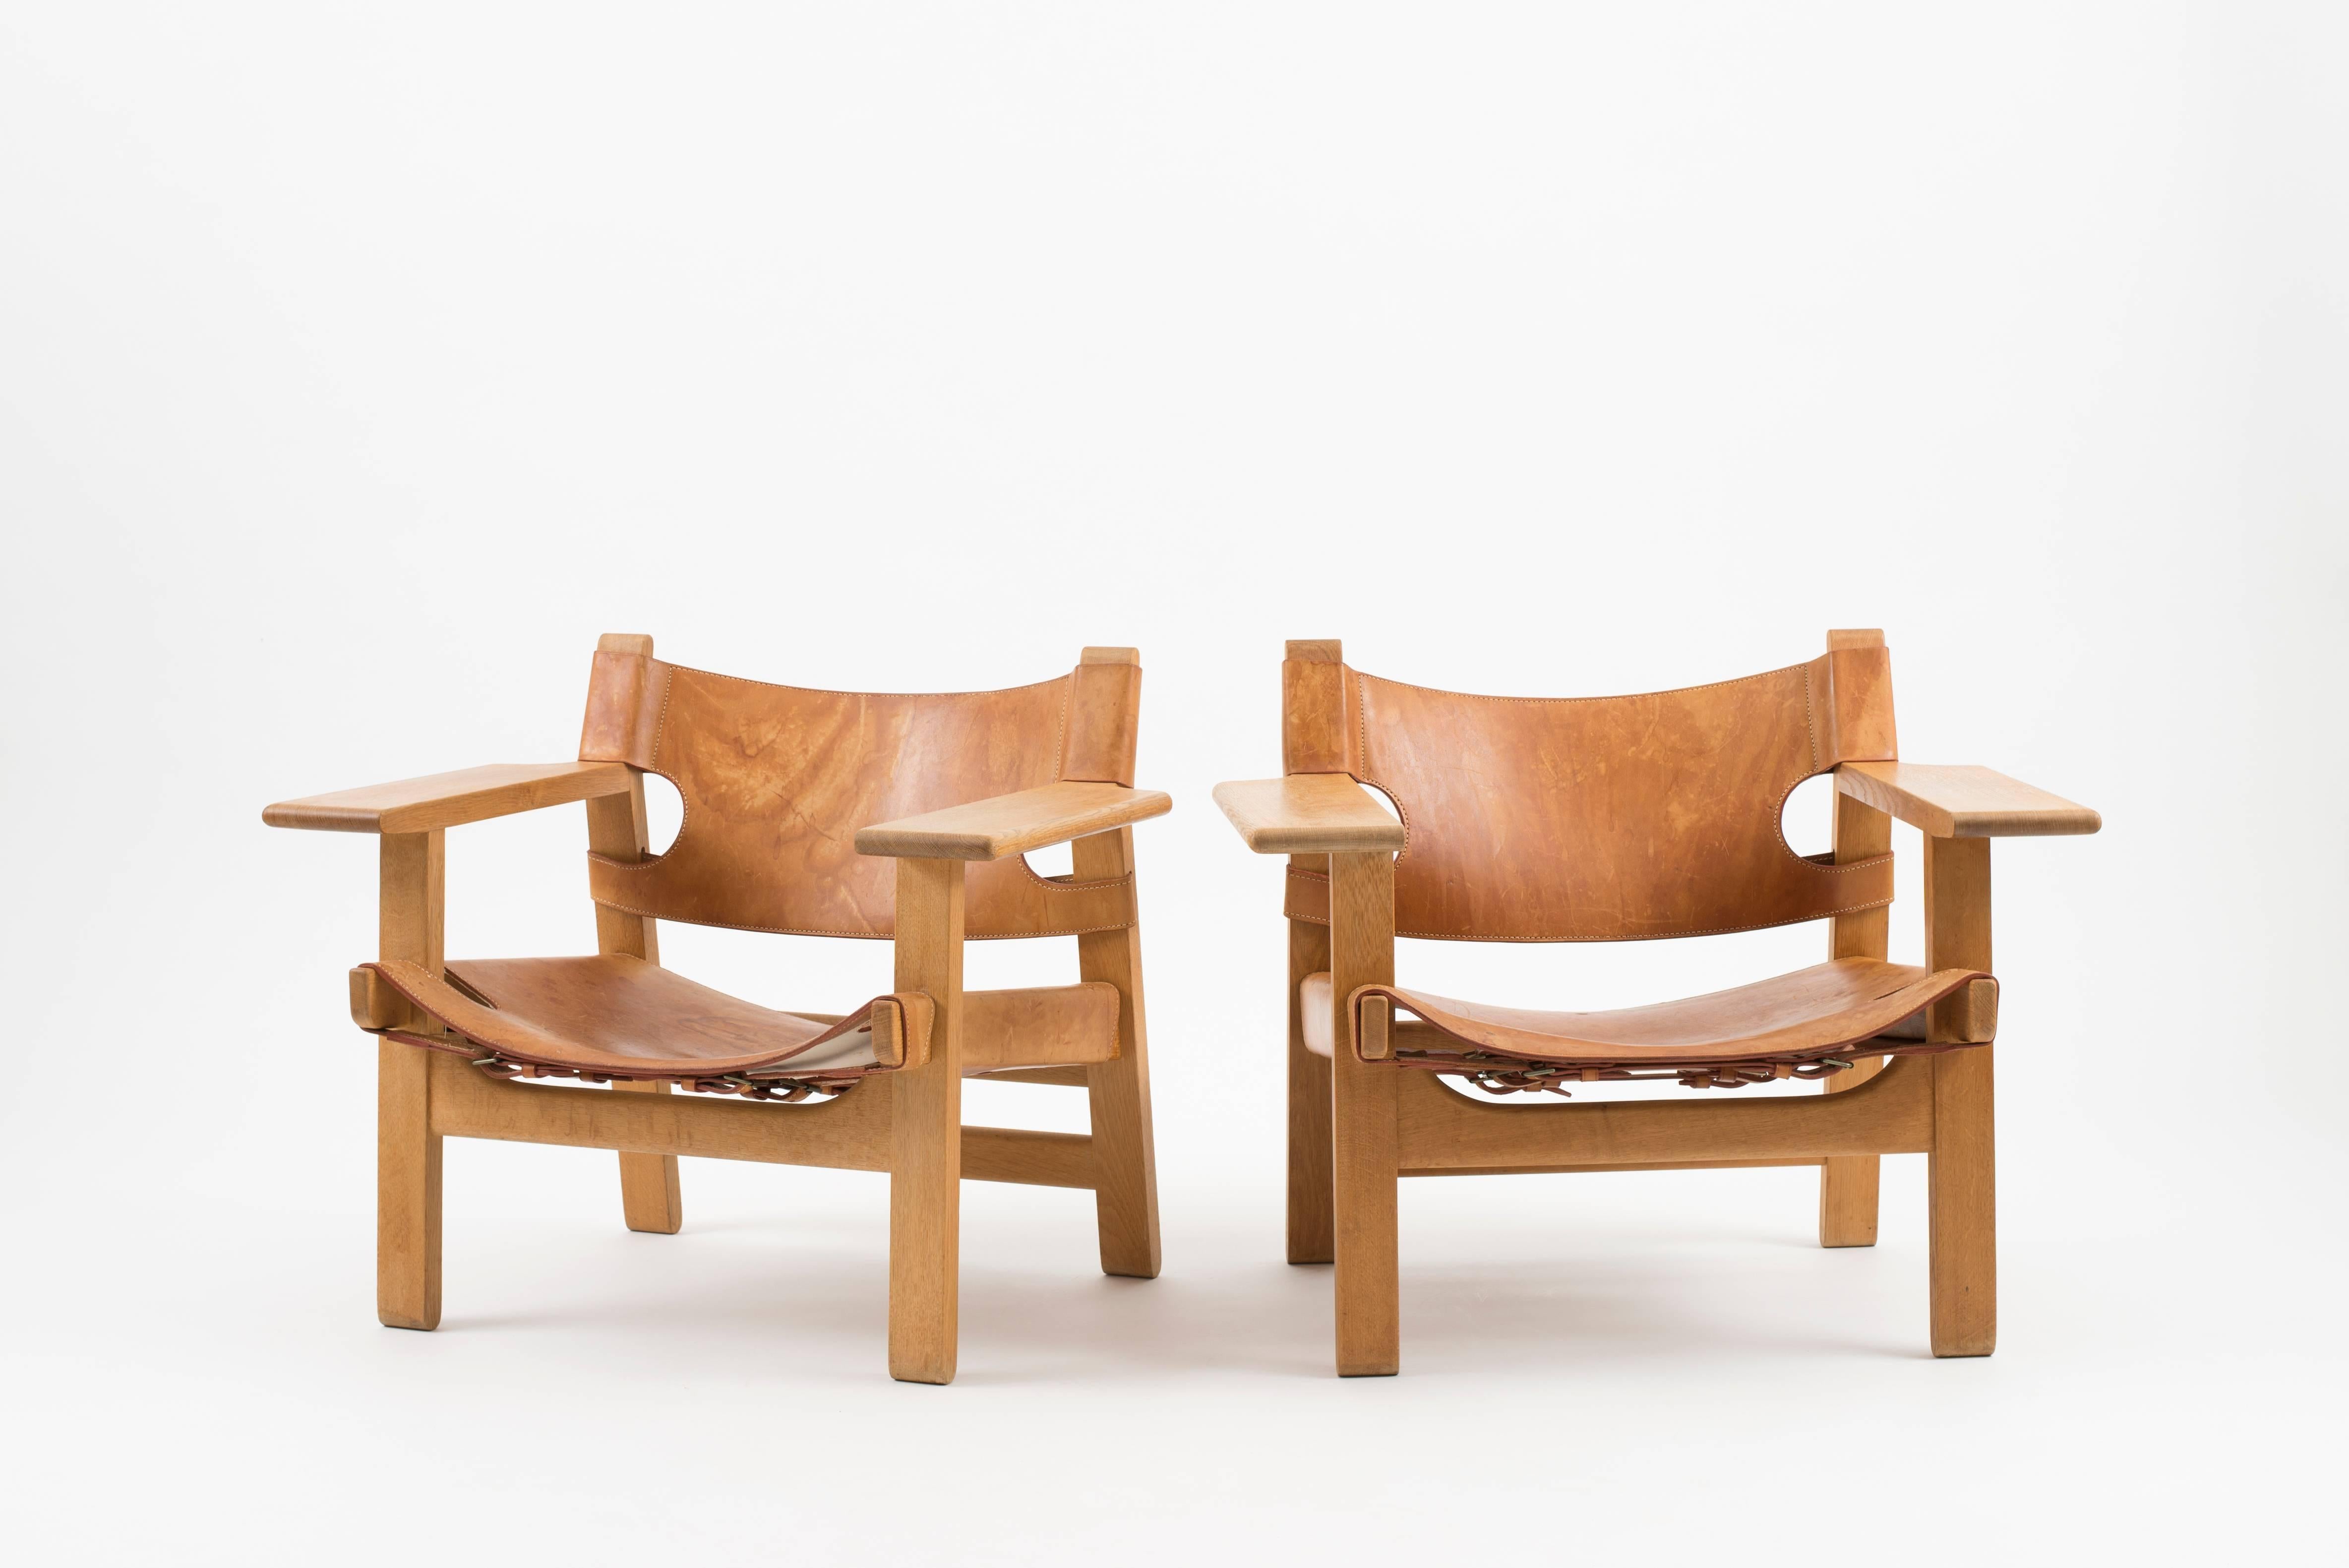 A pair of Spanish Chairs by Børge Mogensen. Executed by Fredericia Furniture.

Oak and vegetable tanned leather. Reverse with paper labels Fredericia Furniture, Denmark